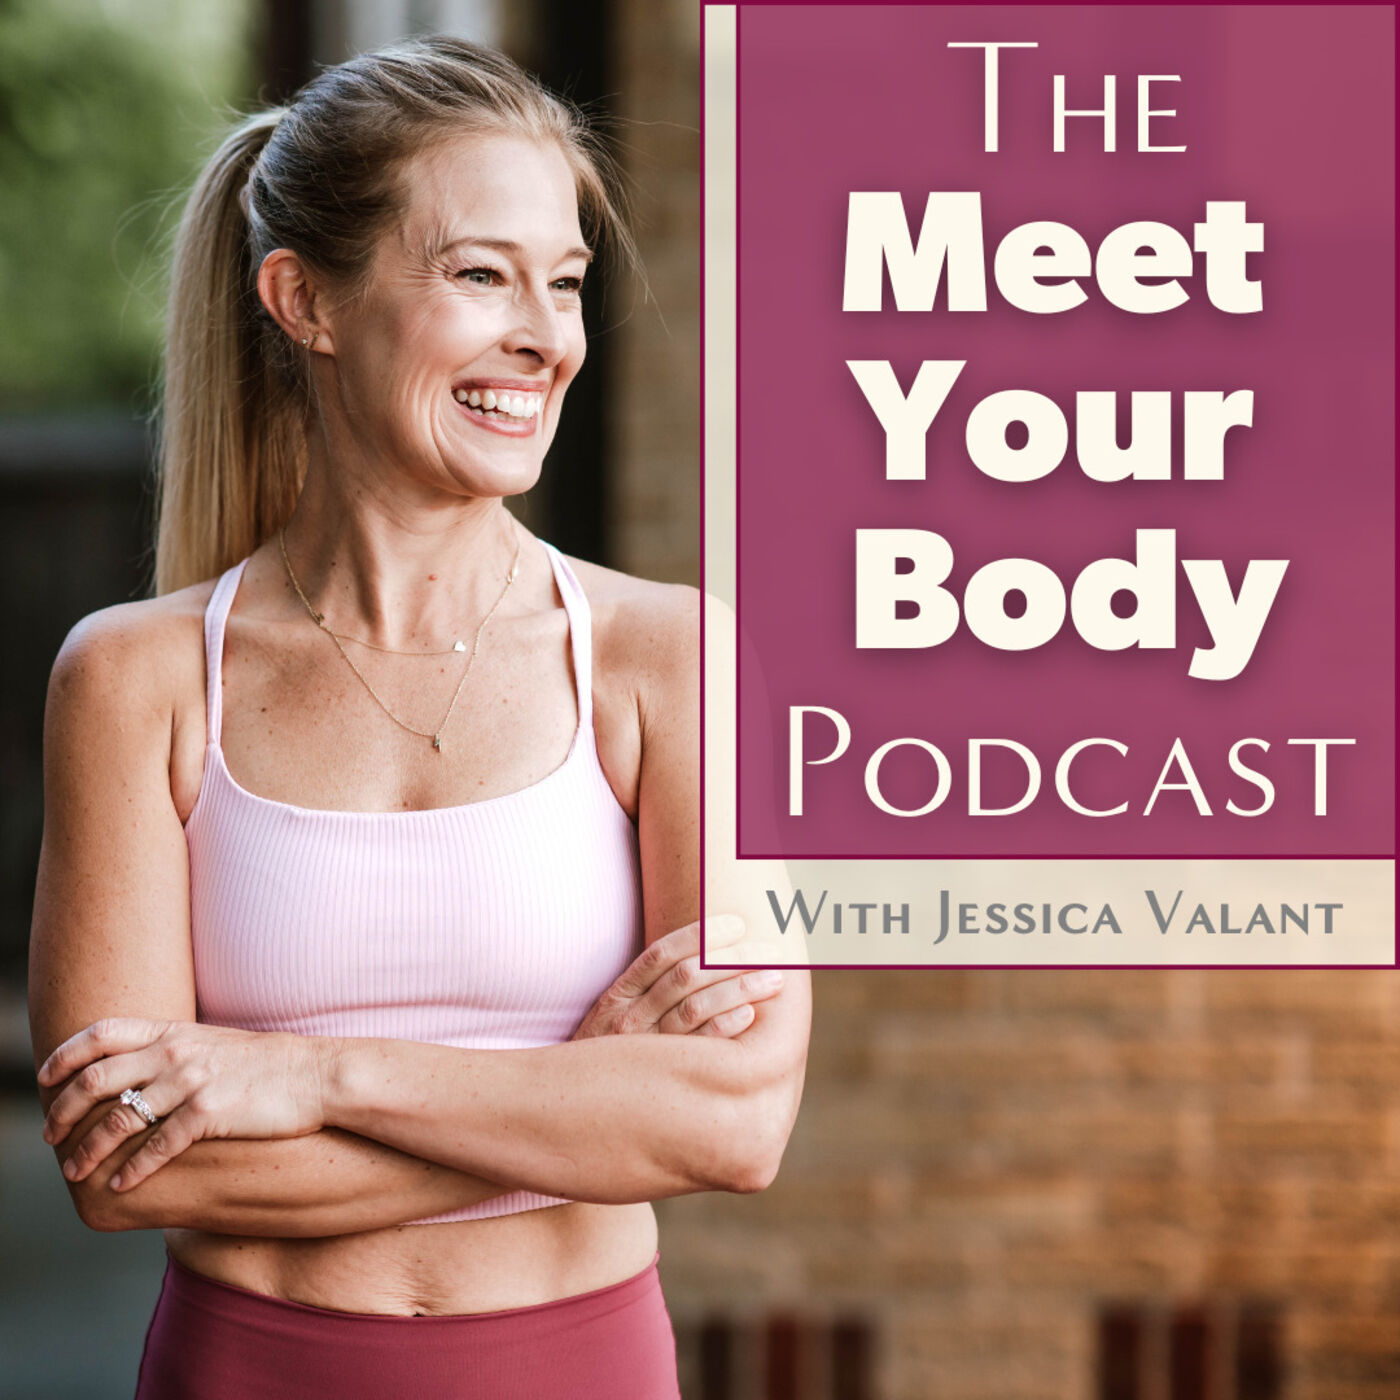 The Meet Your Body Podcast with Jessica Valant